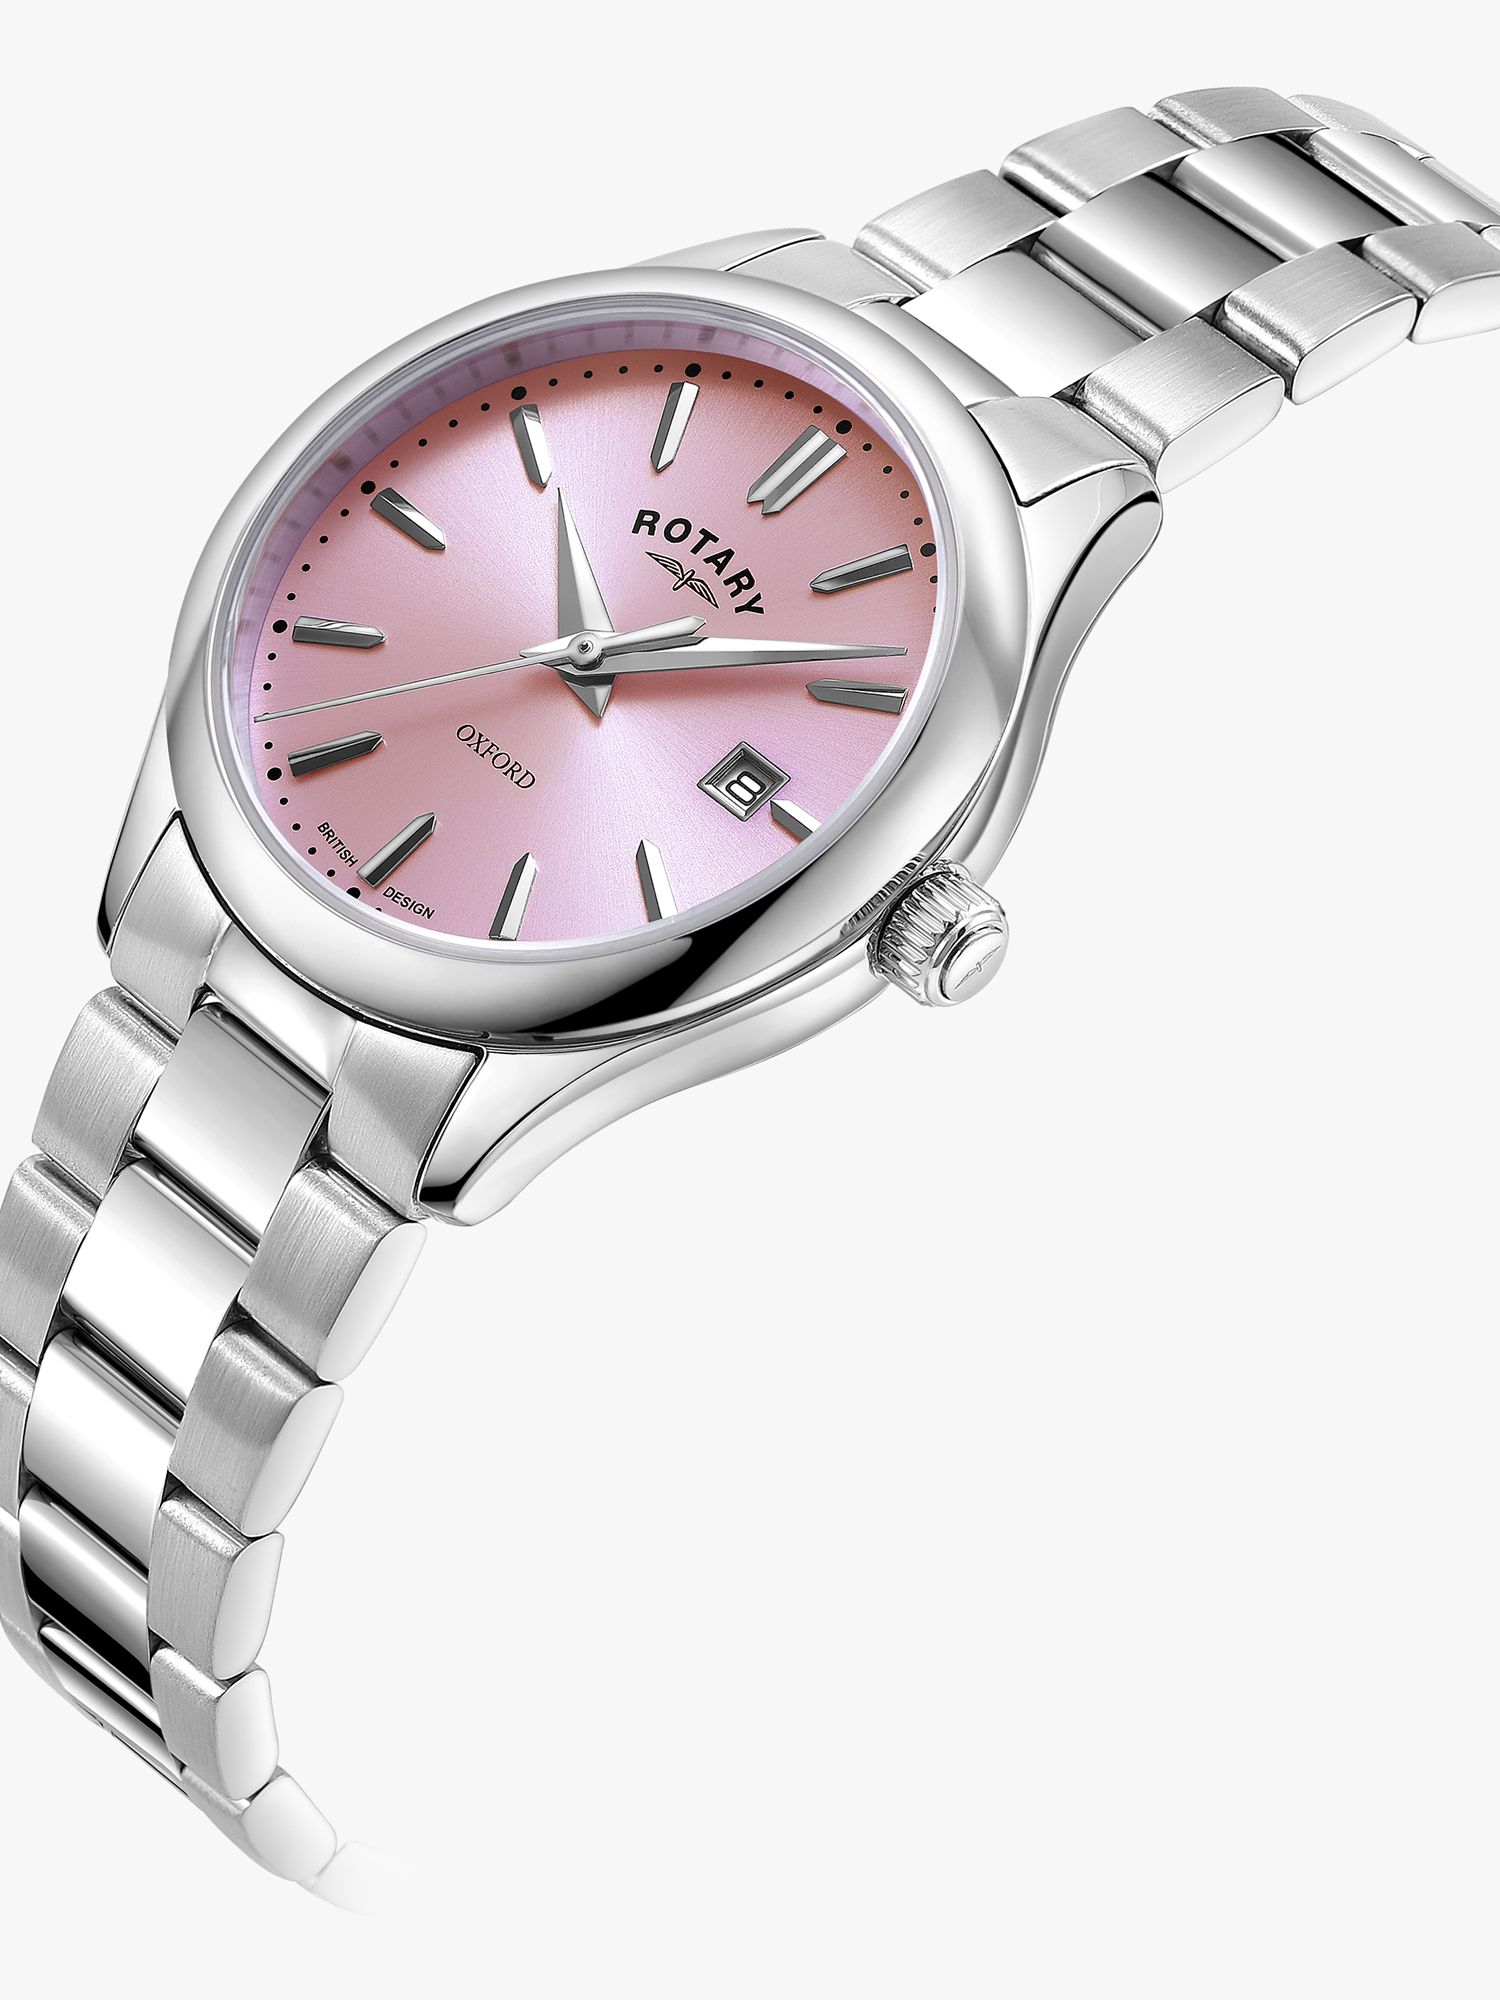 Buy Rotary Women's Oxford Date Bracelet Strap Watch Online at johnlewis.com